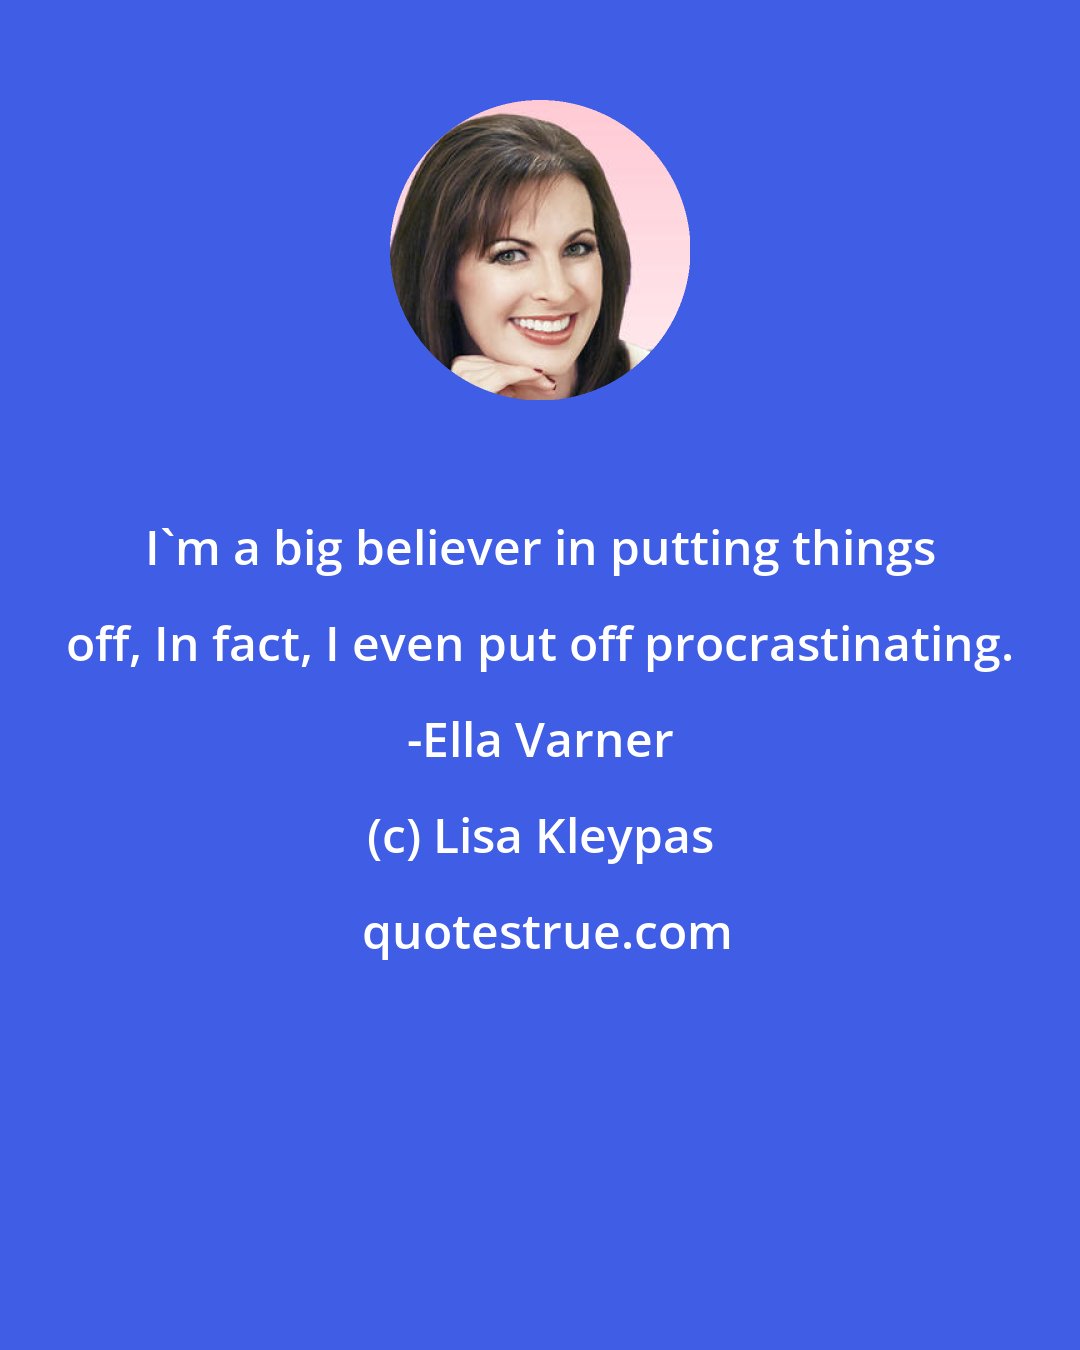 Lisa Kleypas: I'm a big believer in putting things off, In fact, I even put off procrastinating. -Ella Varner